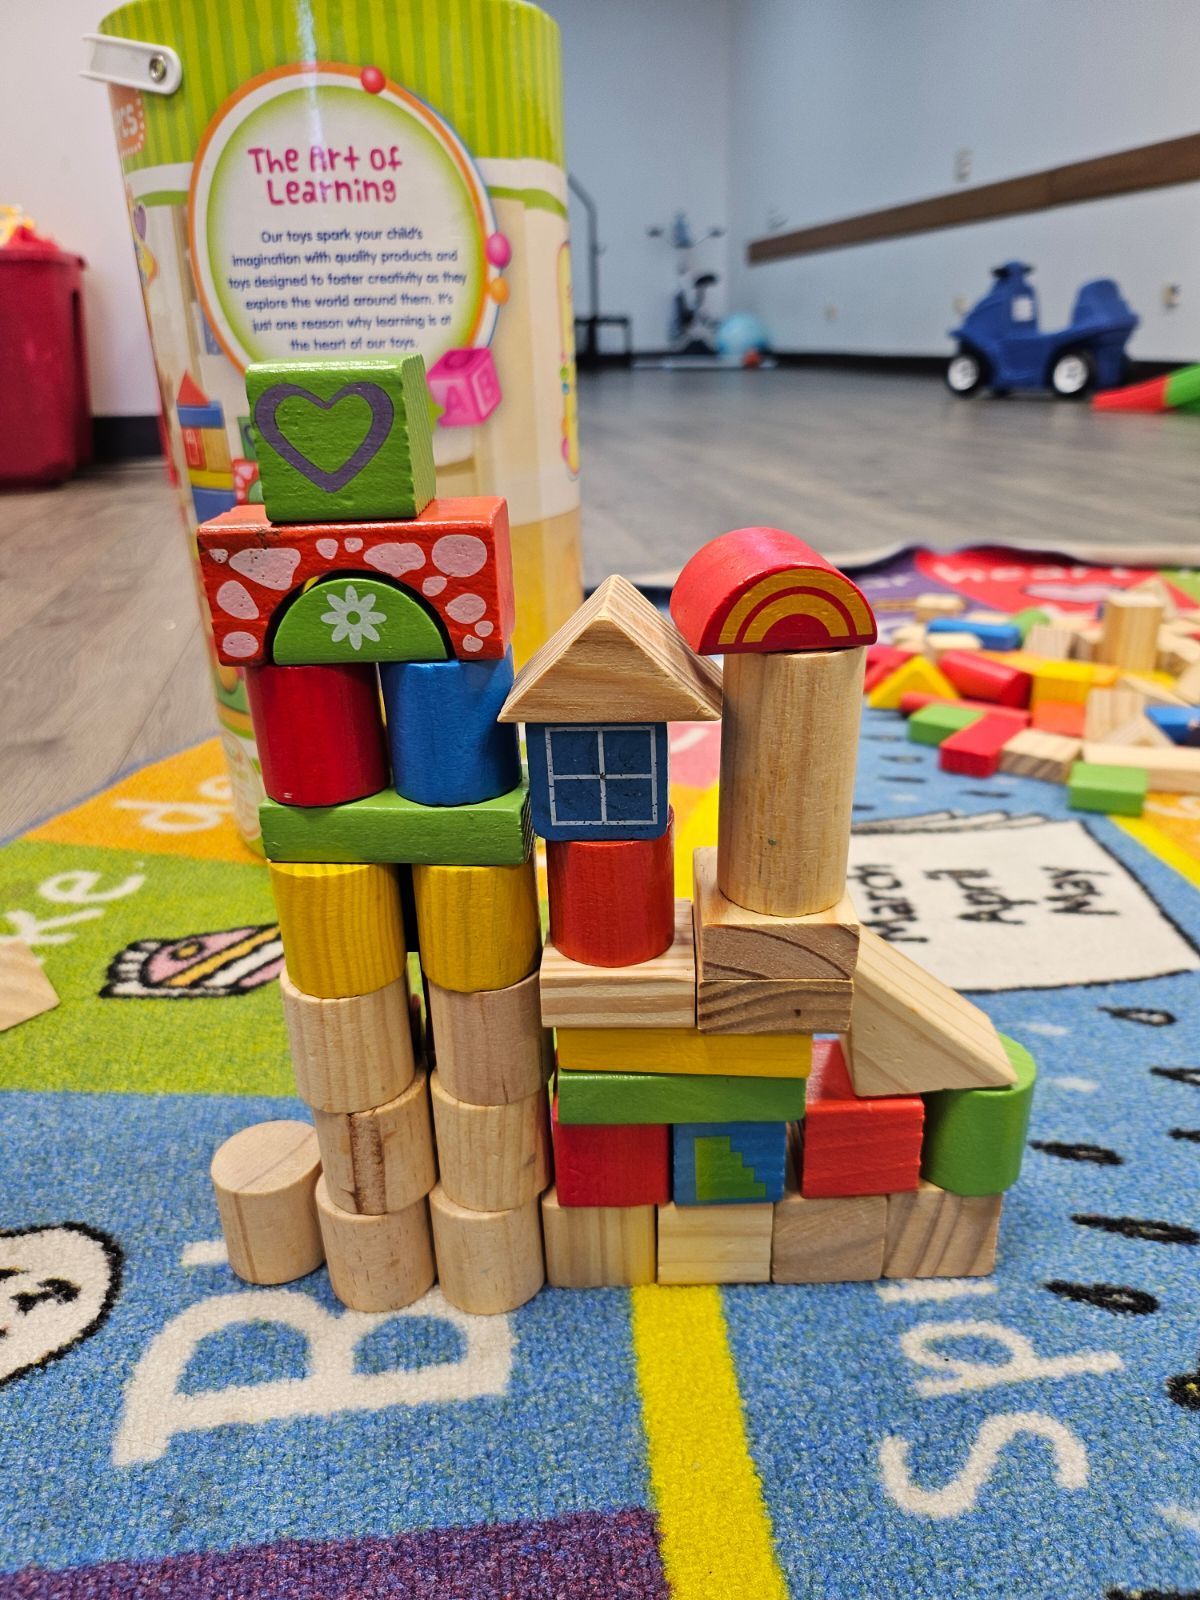 A bunch of wooden blocks are stacked on top of each other on a rug.